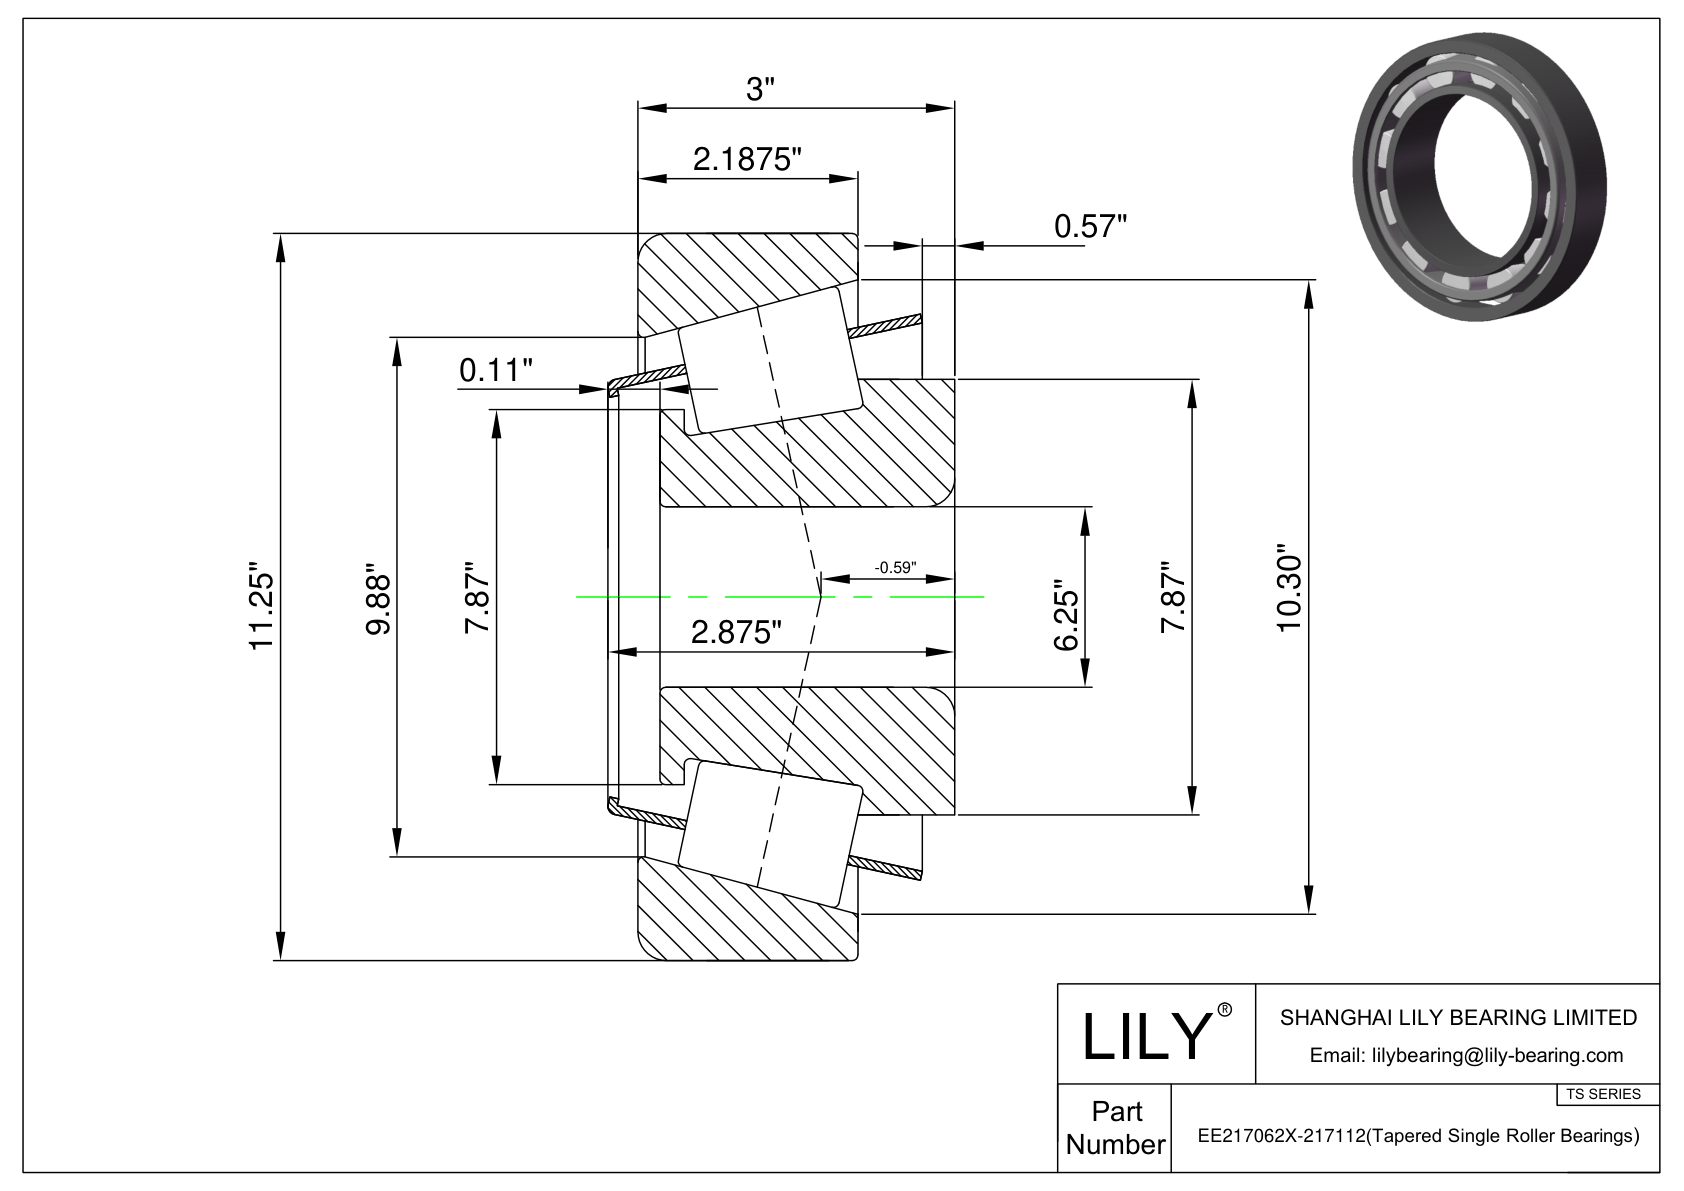 EE217062X-217112 TS (Tapered Single Roller Bearings) (Imperial) cad drawing